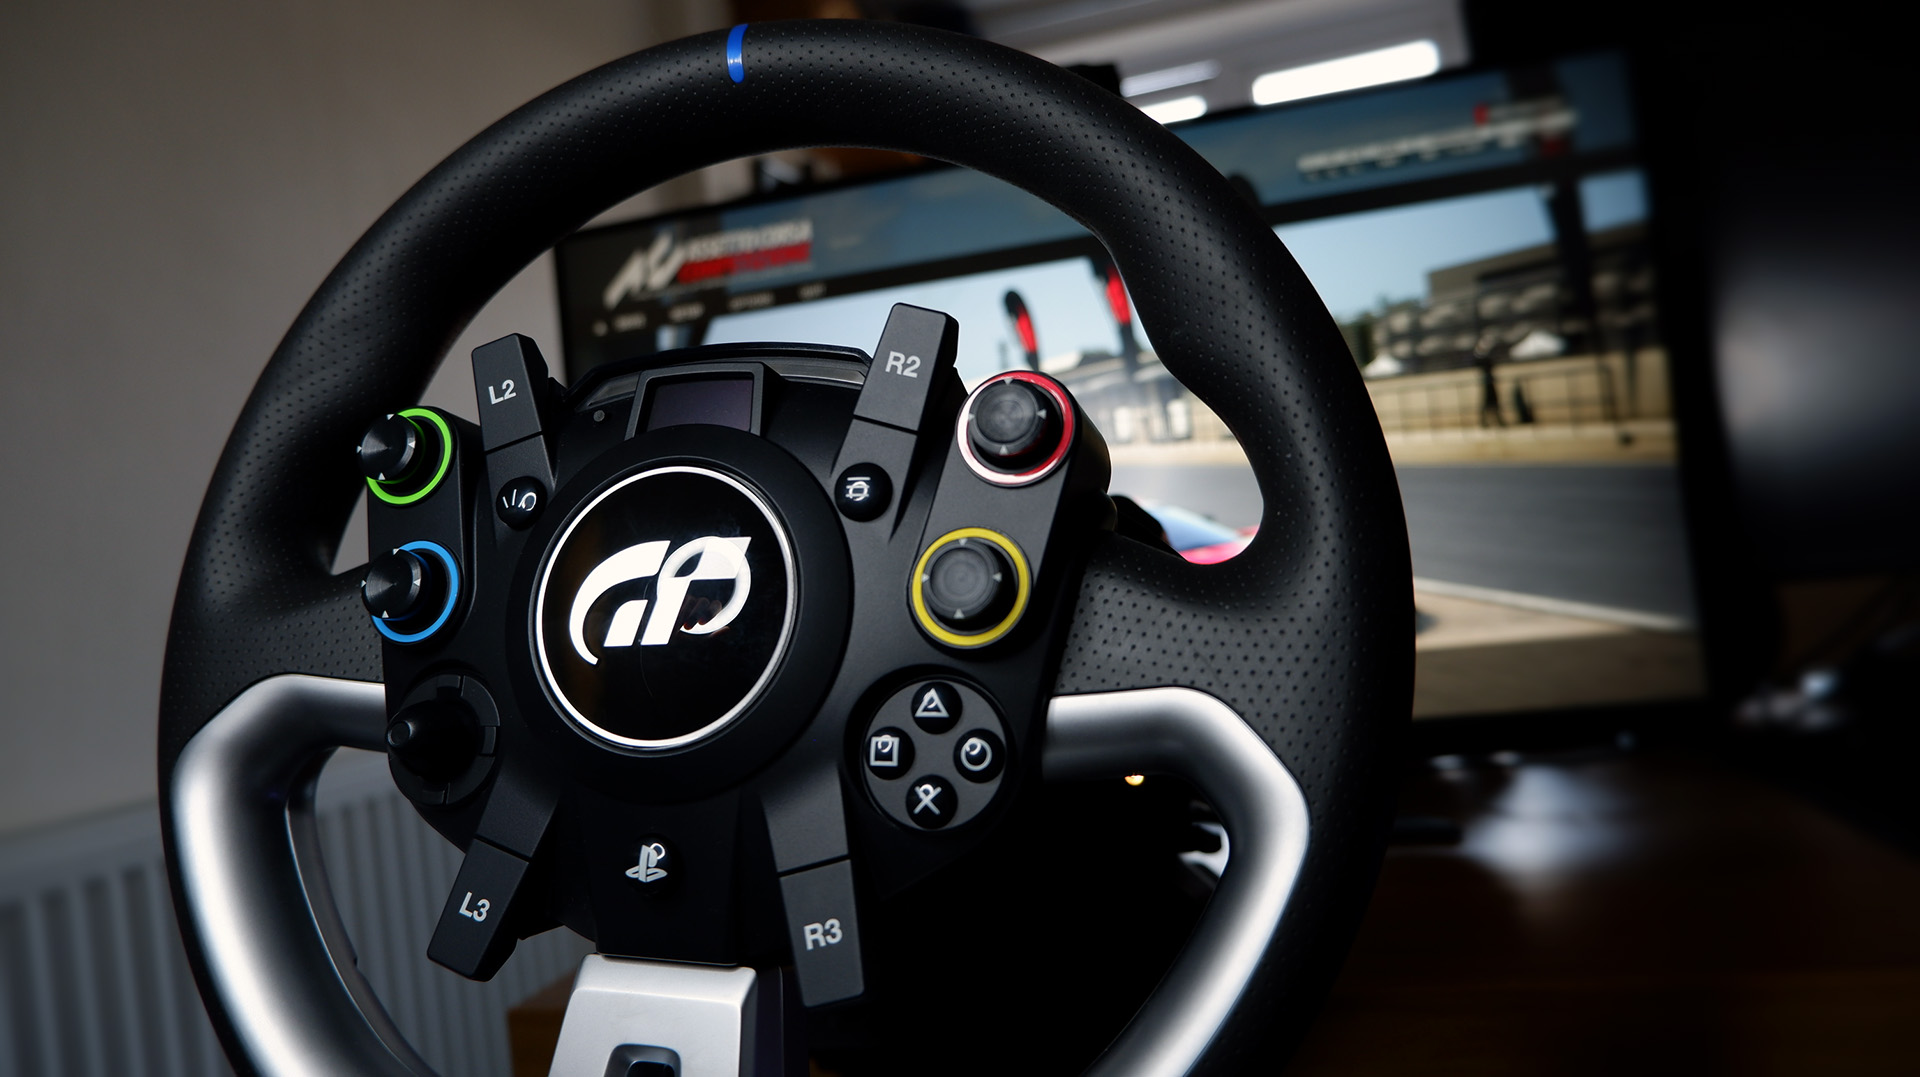 The Fanatec GT DD Pro racing wheel and wheelbase on a desk with monitor playing Assetto Corsa behind.